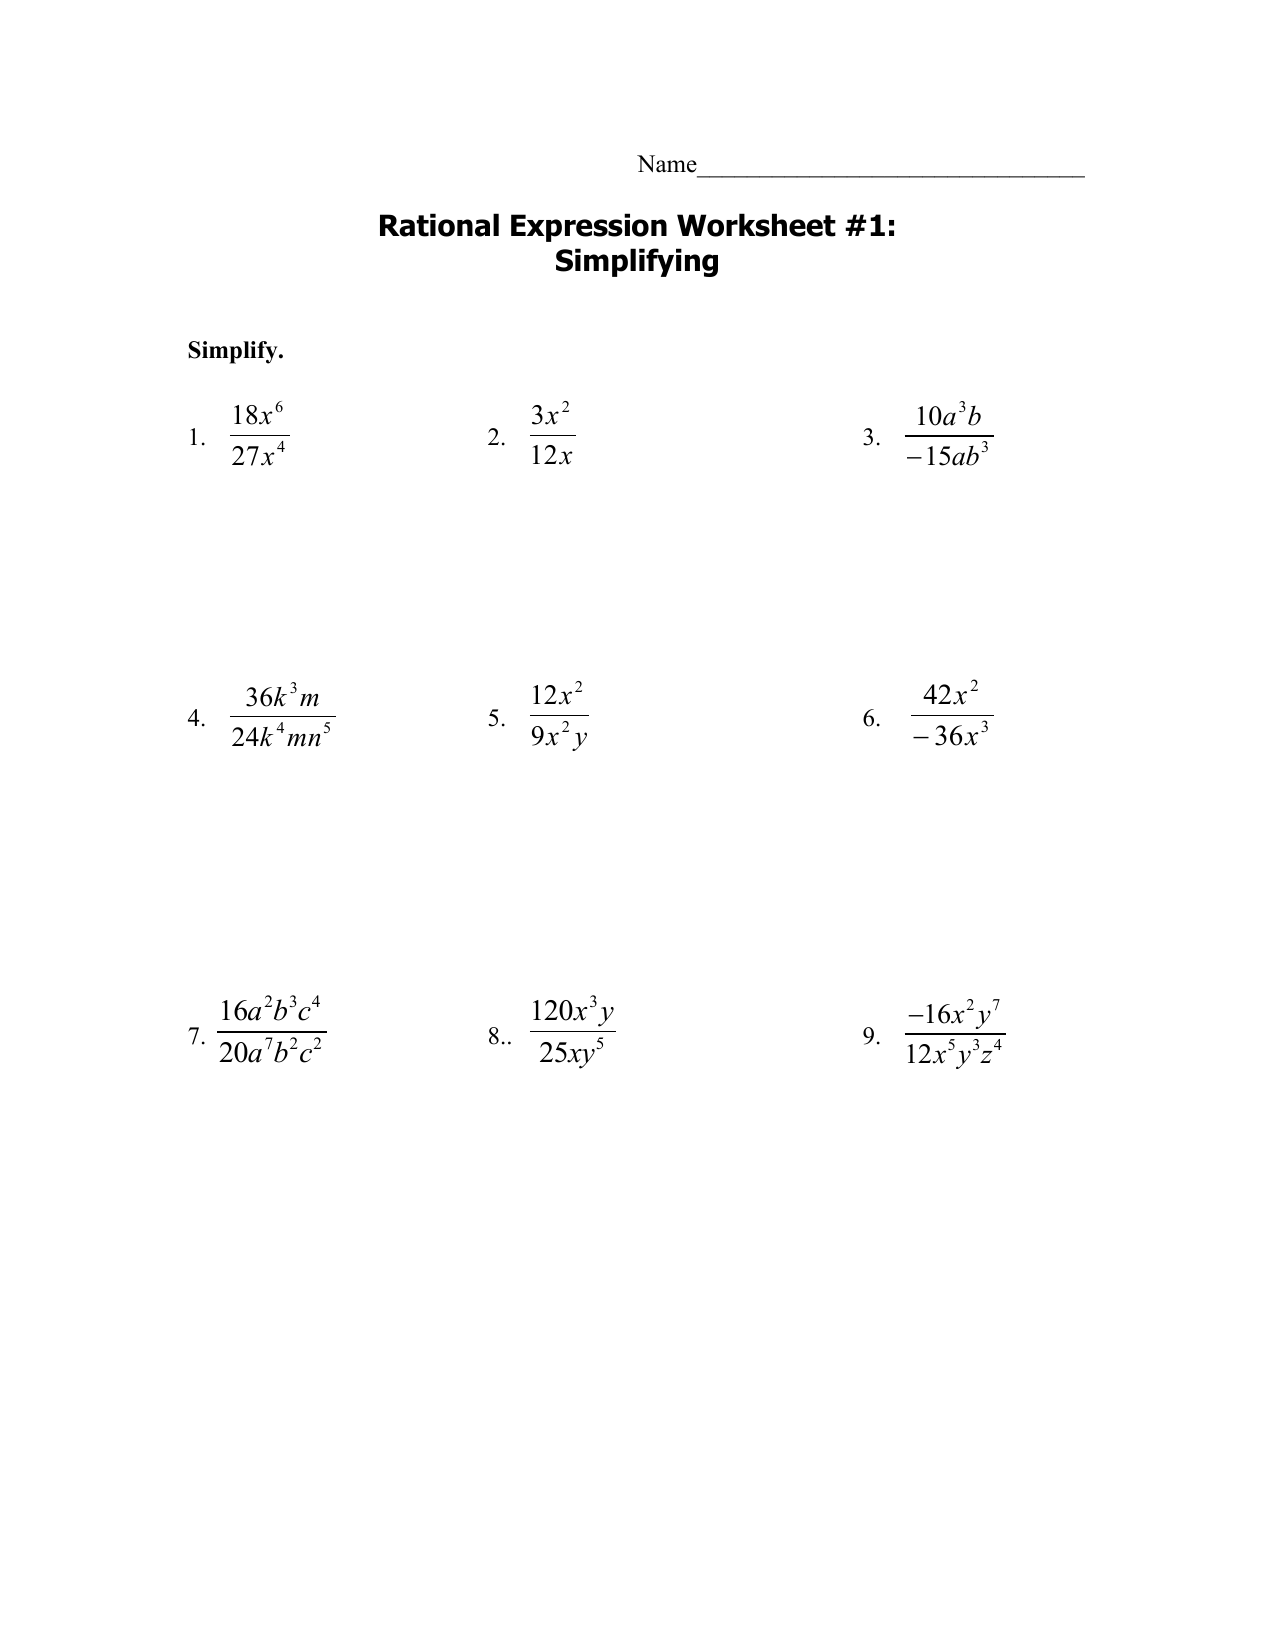 M22 rationalworksheets22-225 22 With Regard To Simplify Rational Expressions Worksheet